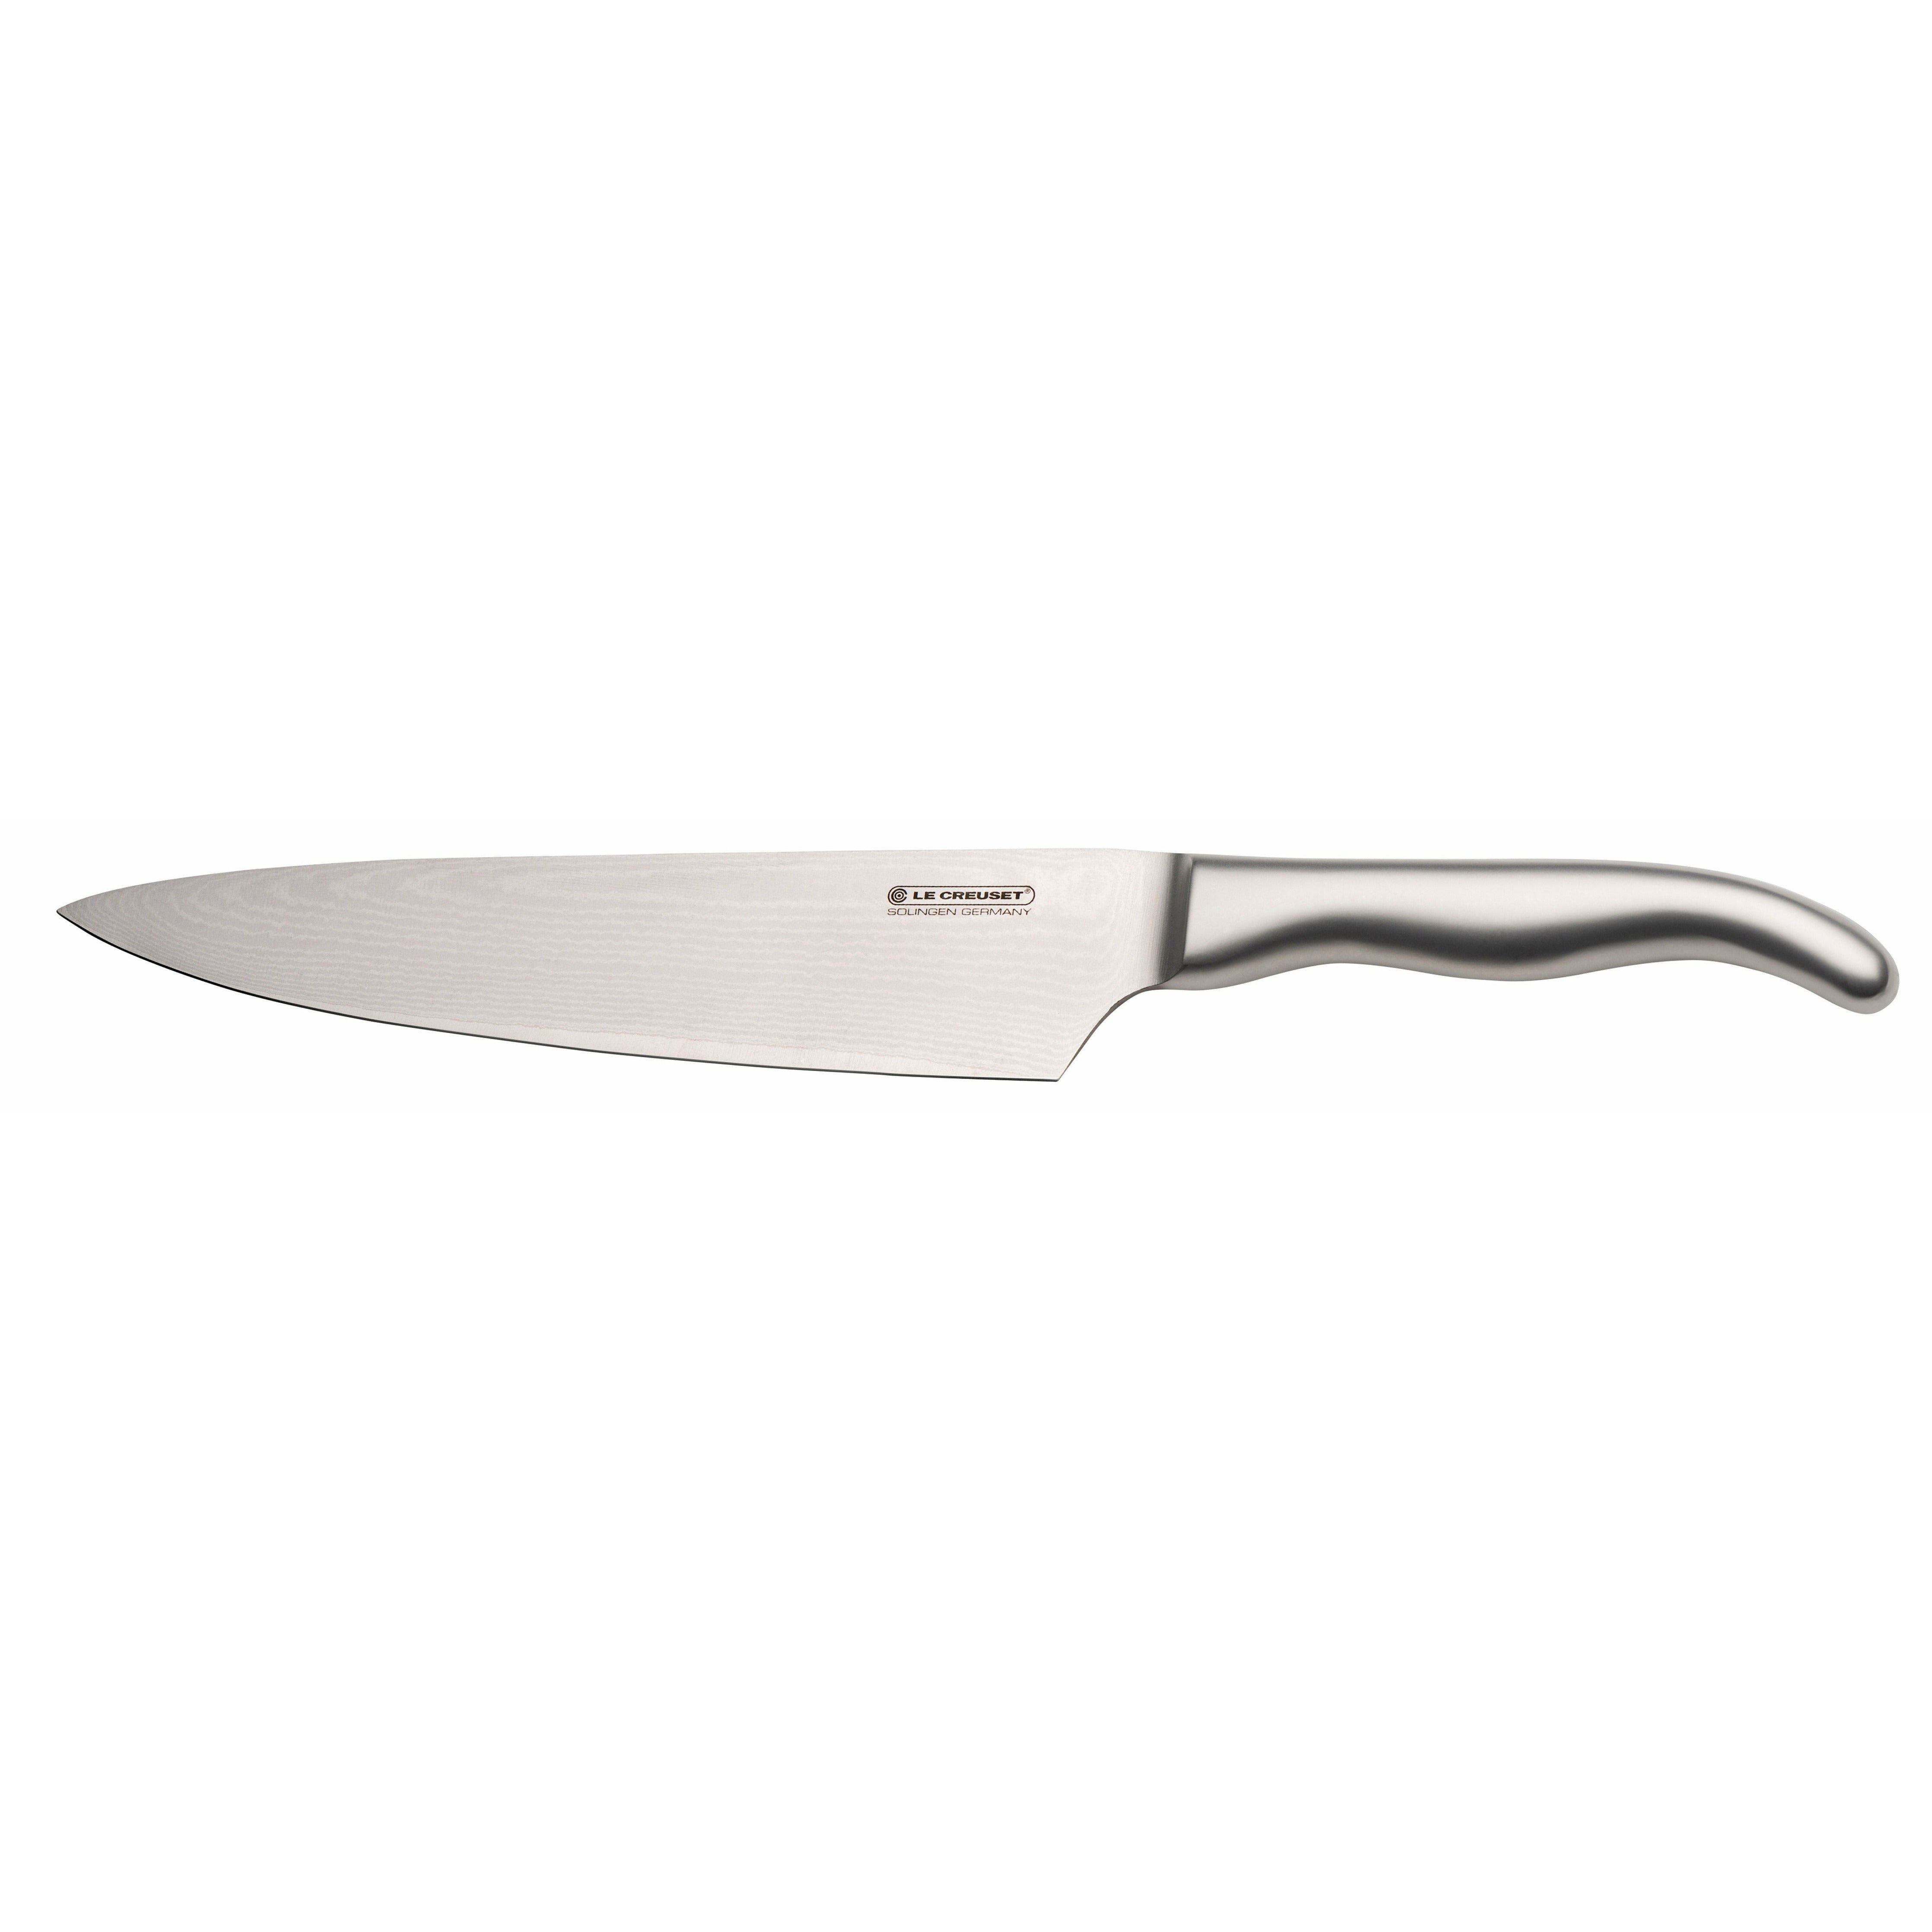 Le Creuset Chef's Knife Stainless Steel Handle, 20 Cm